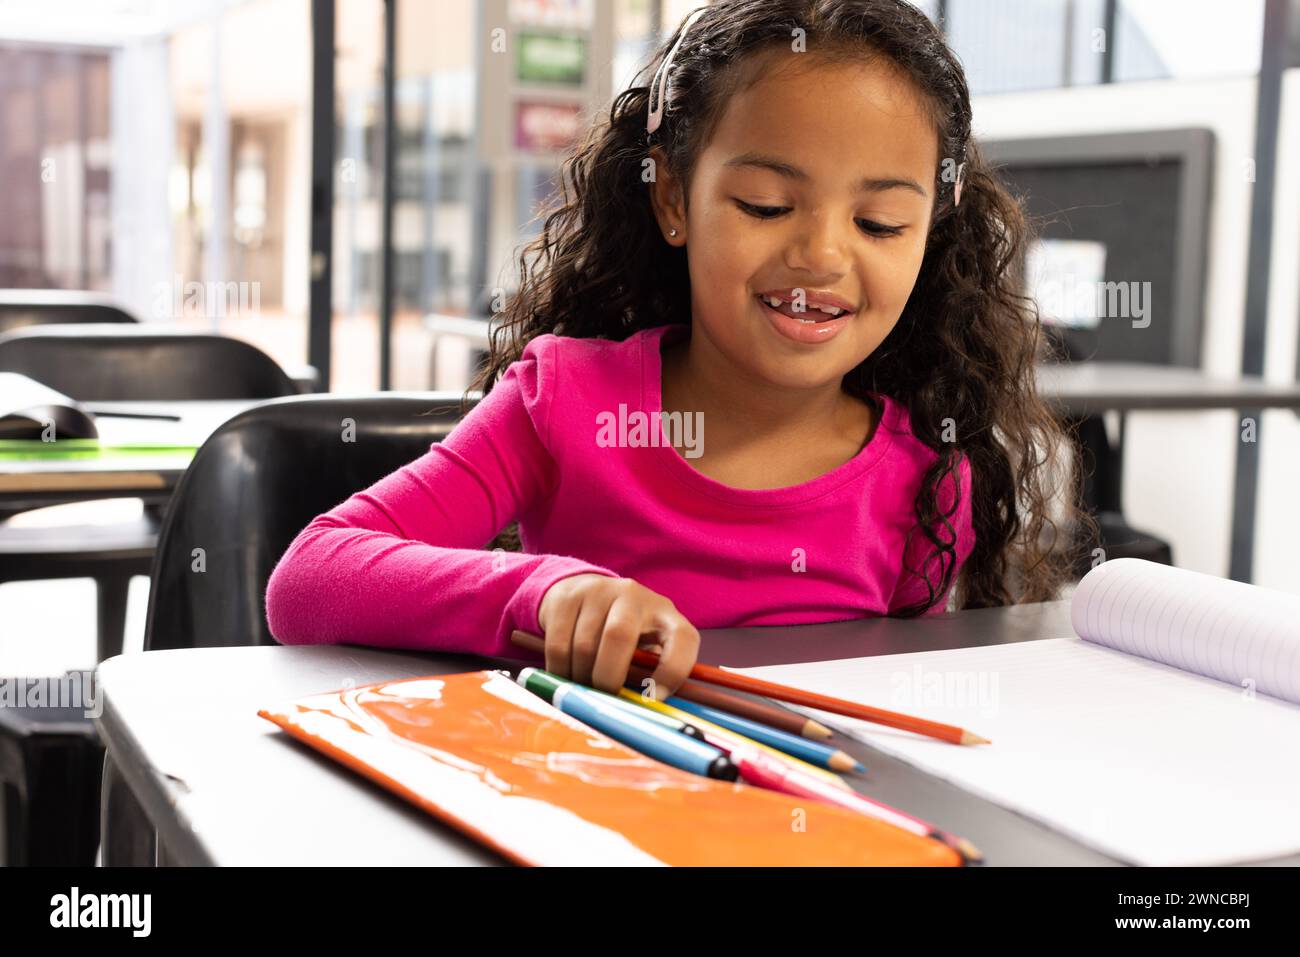 Biracial girl with curly hair draws with colored pencils in a school classroom Stock Photo